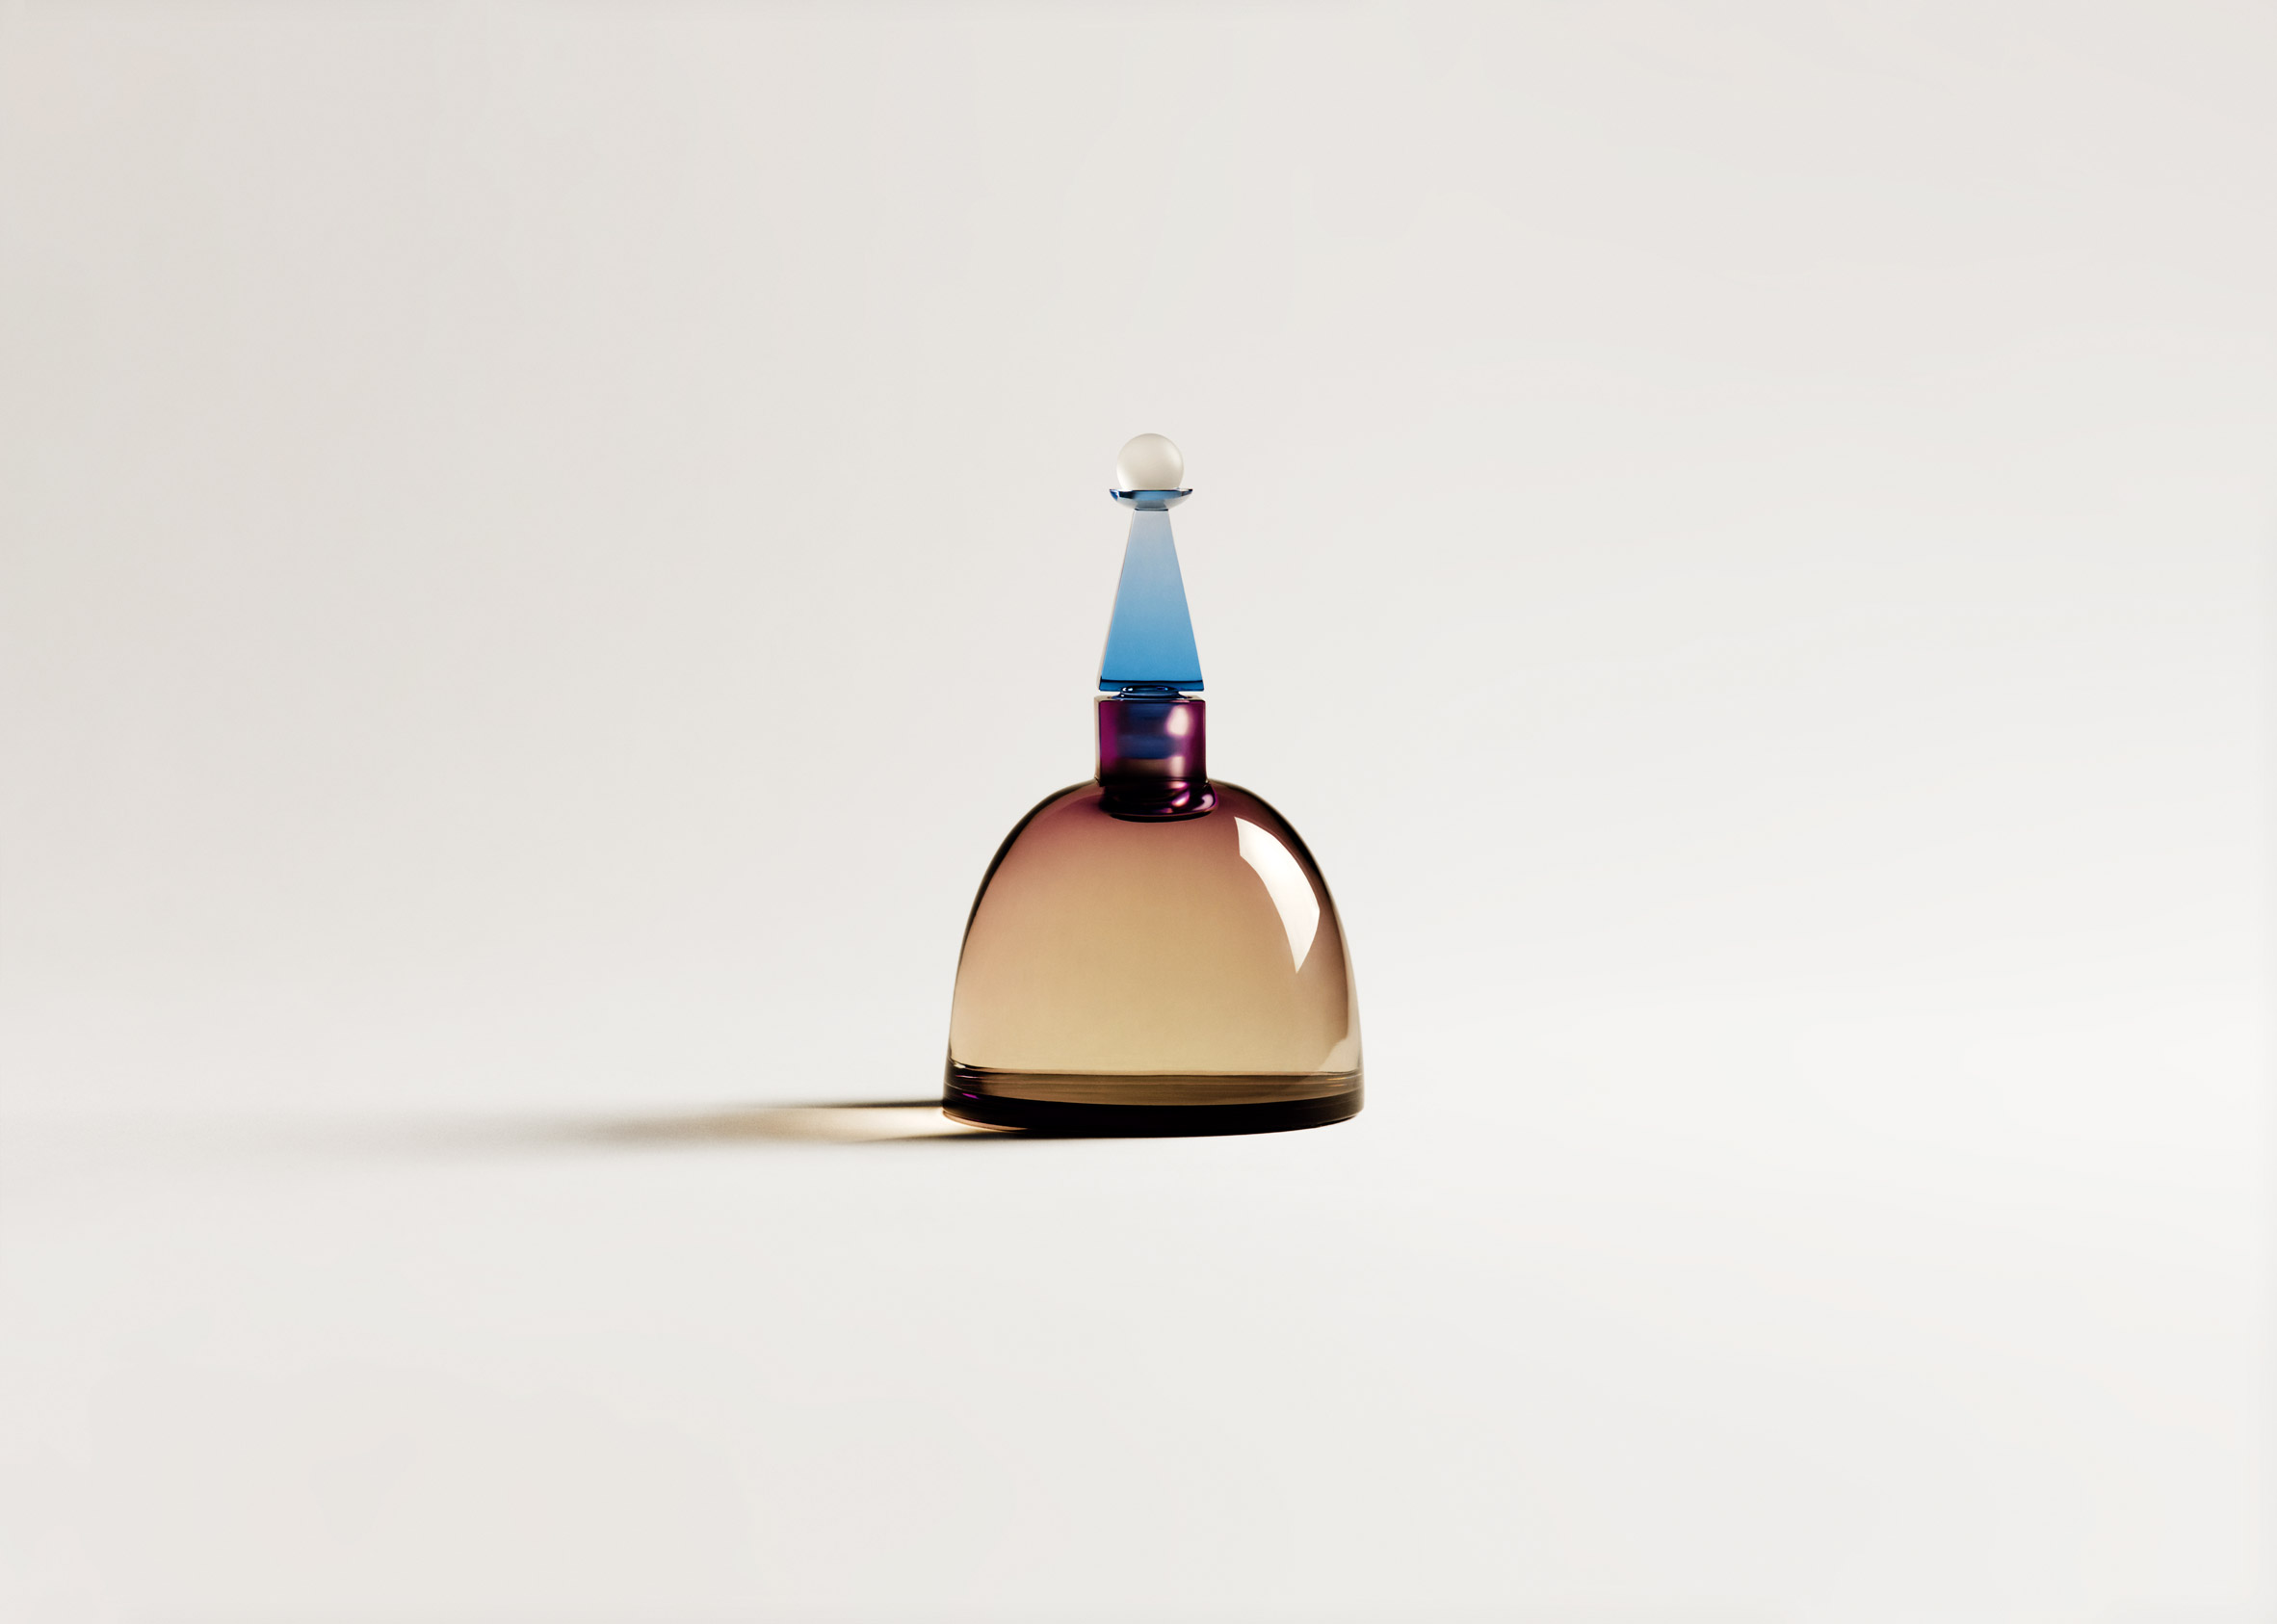 Louis Vuitton taps the architect of Guggenheim Museum to create stunning  these new perfume bottles – Daily Vanity Singapore